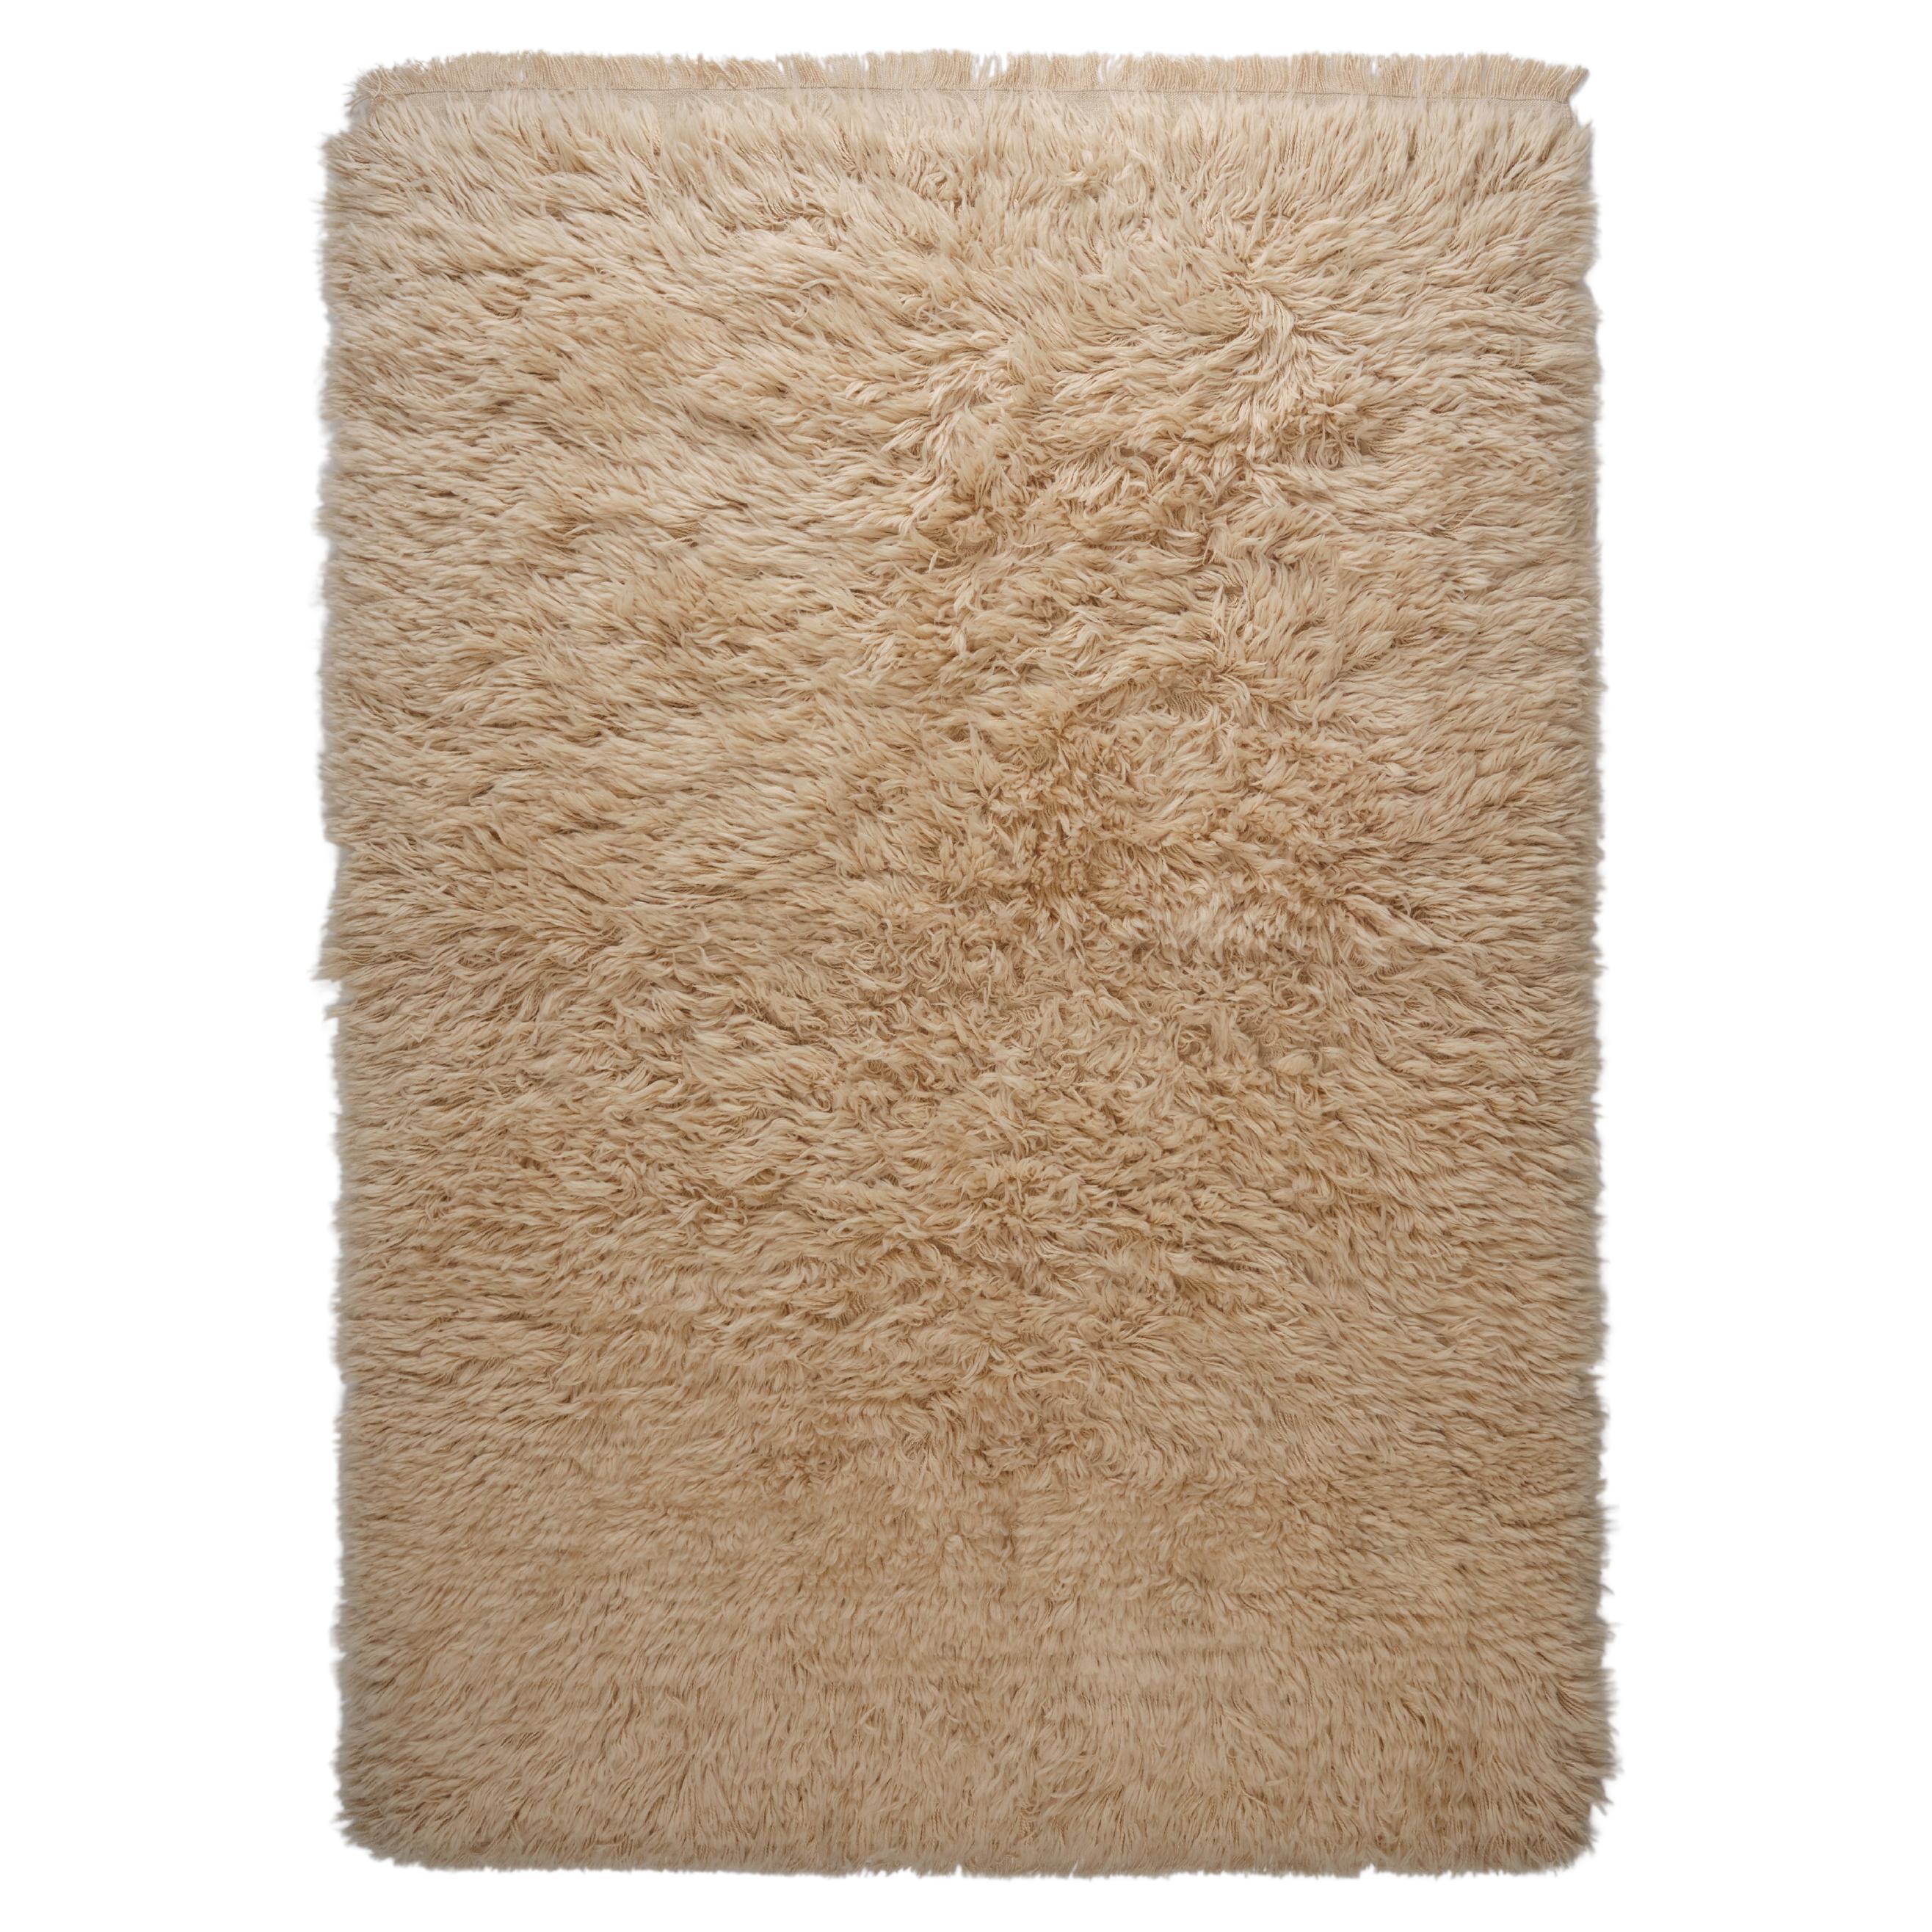 The Forsyth Woolly Shag Rug - Natural, 9x12 For Sale